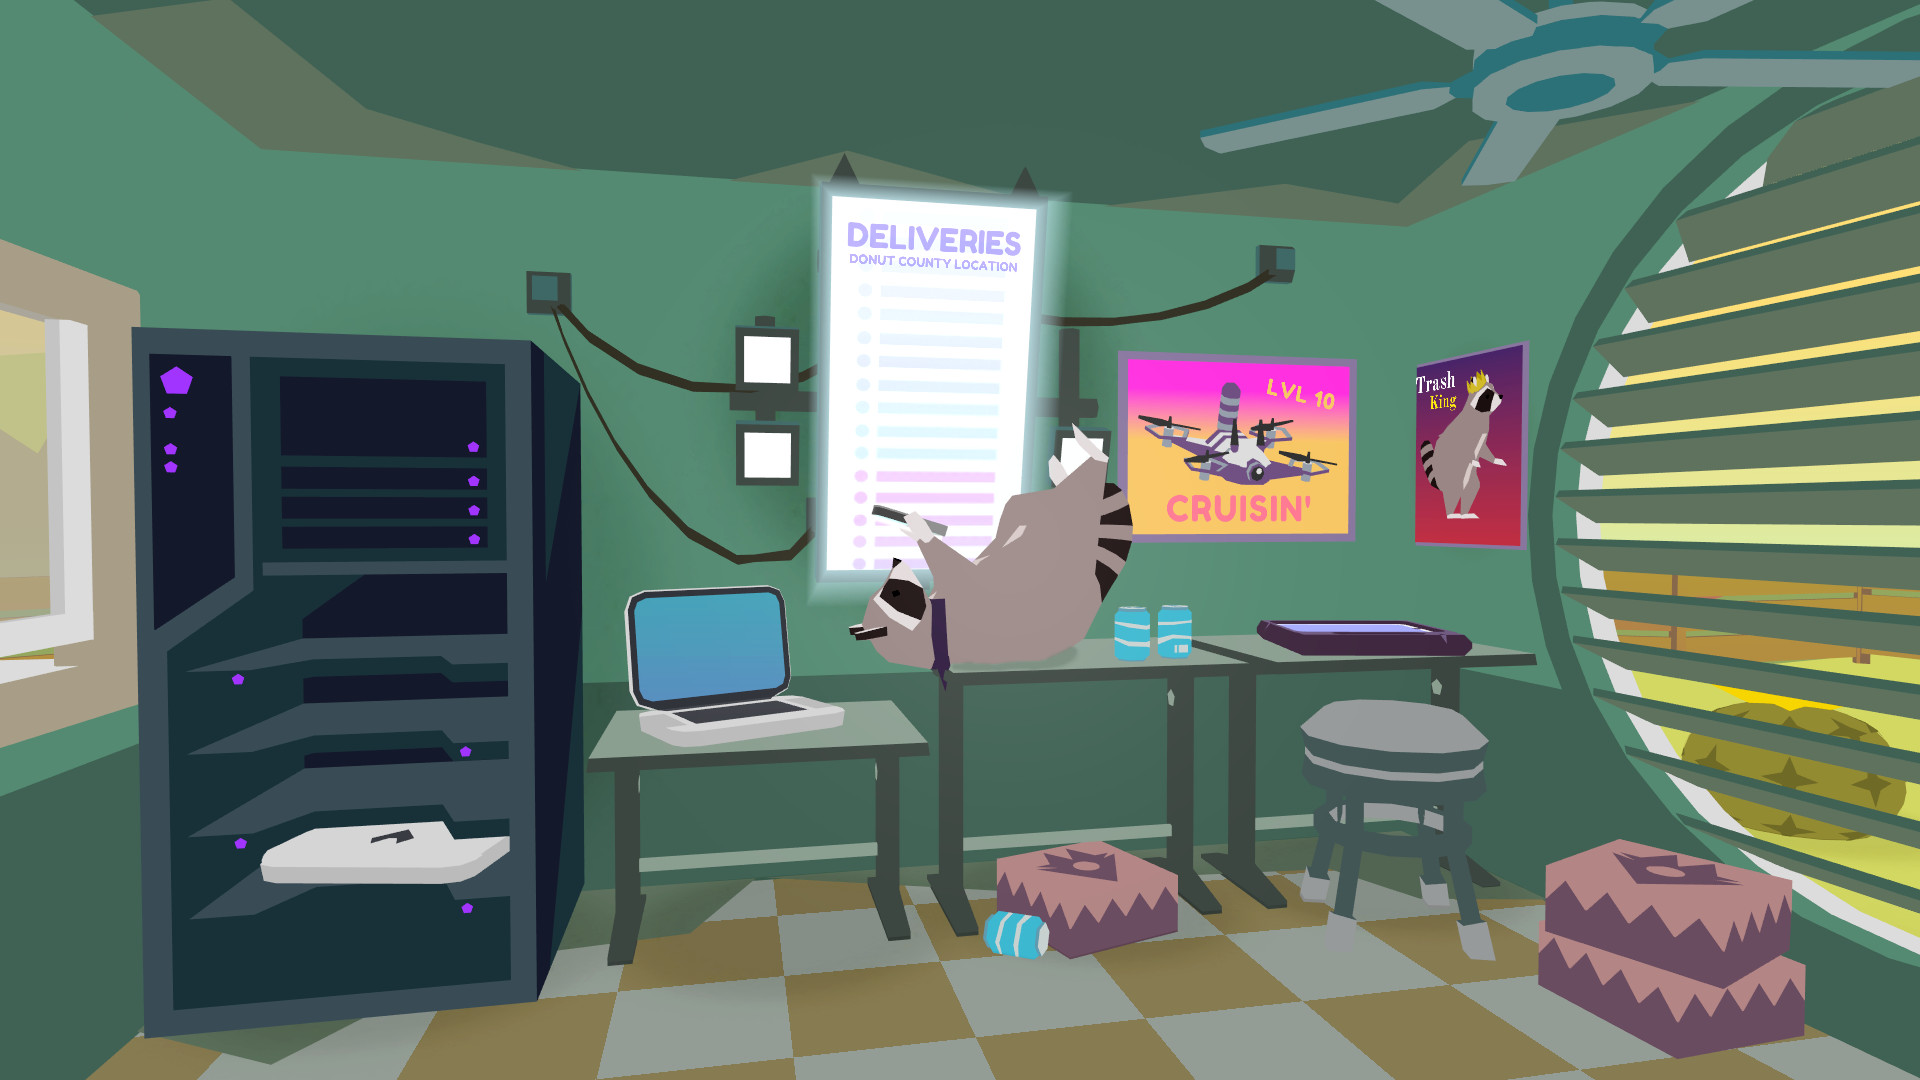 donut county download